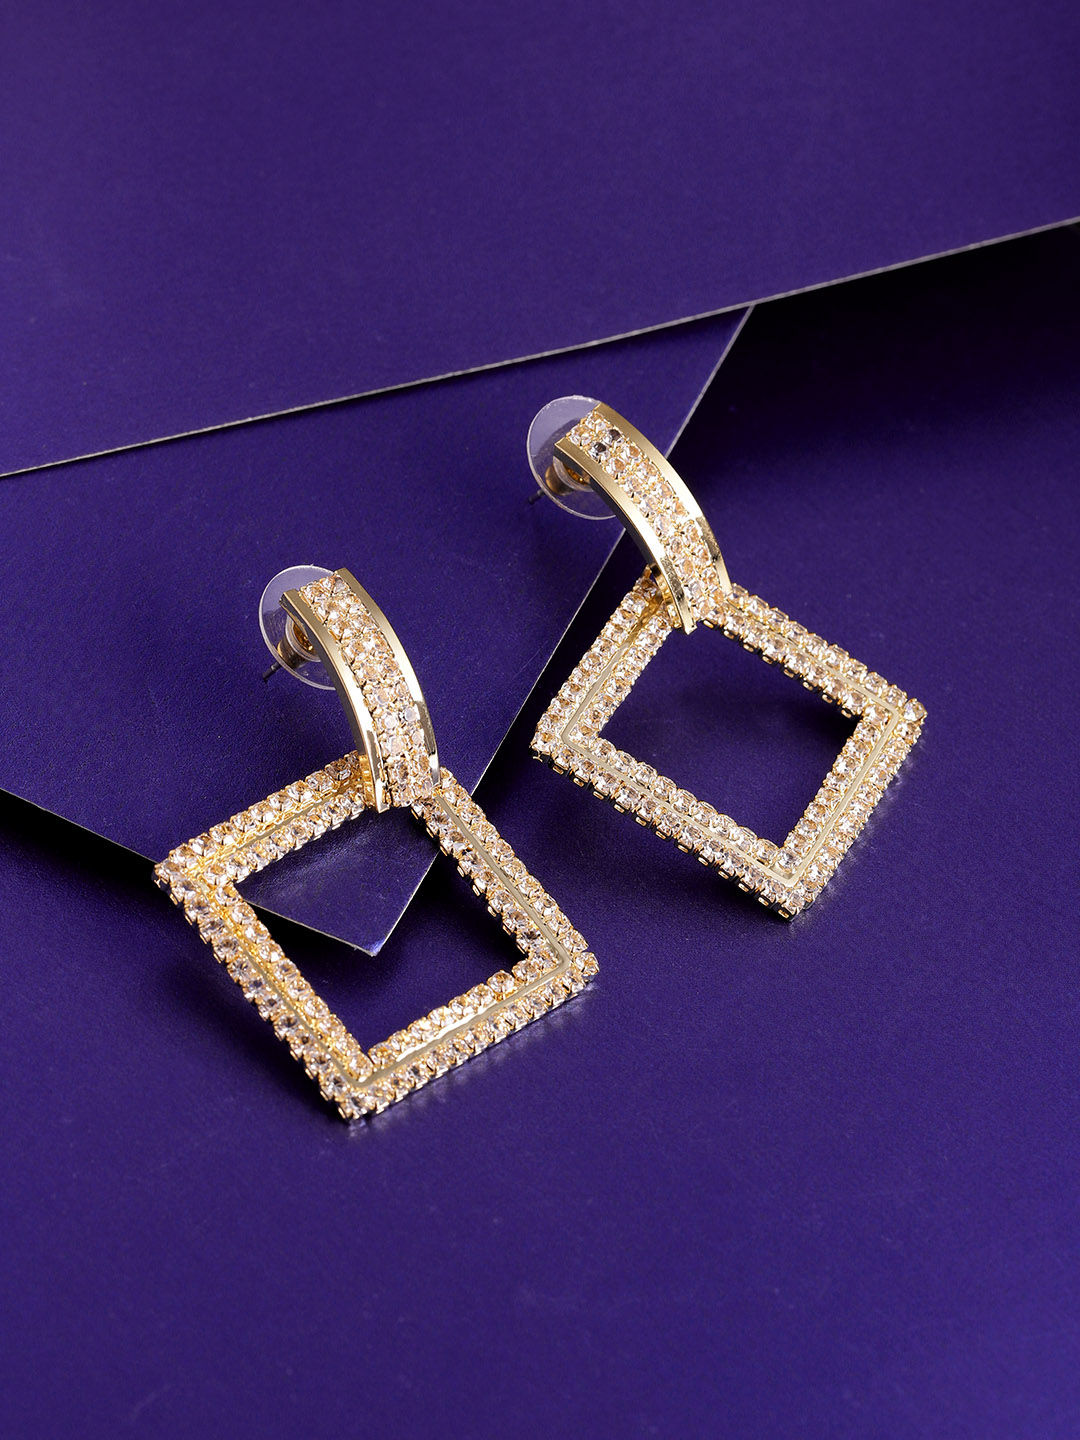 Buy Square Shape Drop Earrings Brilliant Bridal Engagement Online in India   Etsy